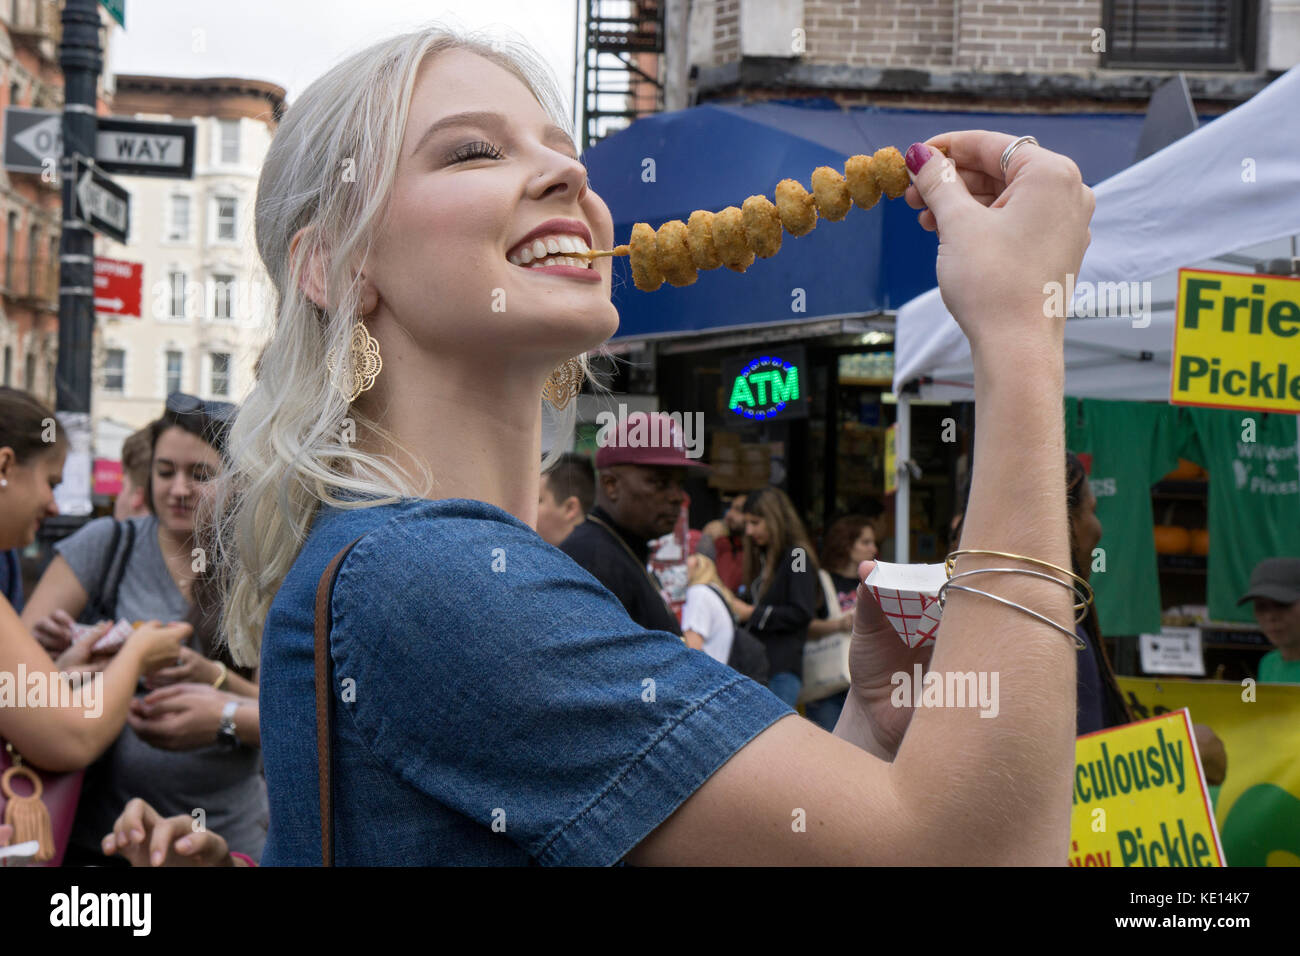 A pretty young lady eating fried pickles at the annual Pickle Day celebration on Orchard Street on the Lower East Side of Manhattan. Stock Photo